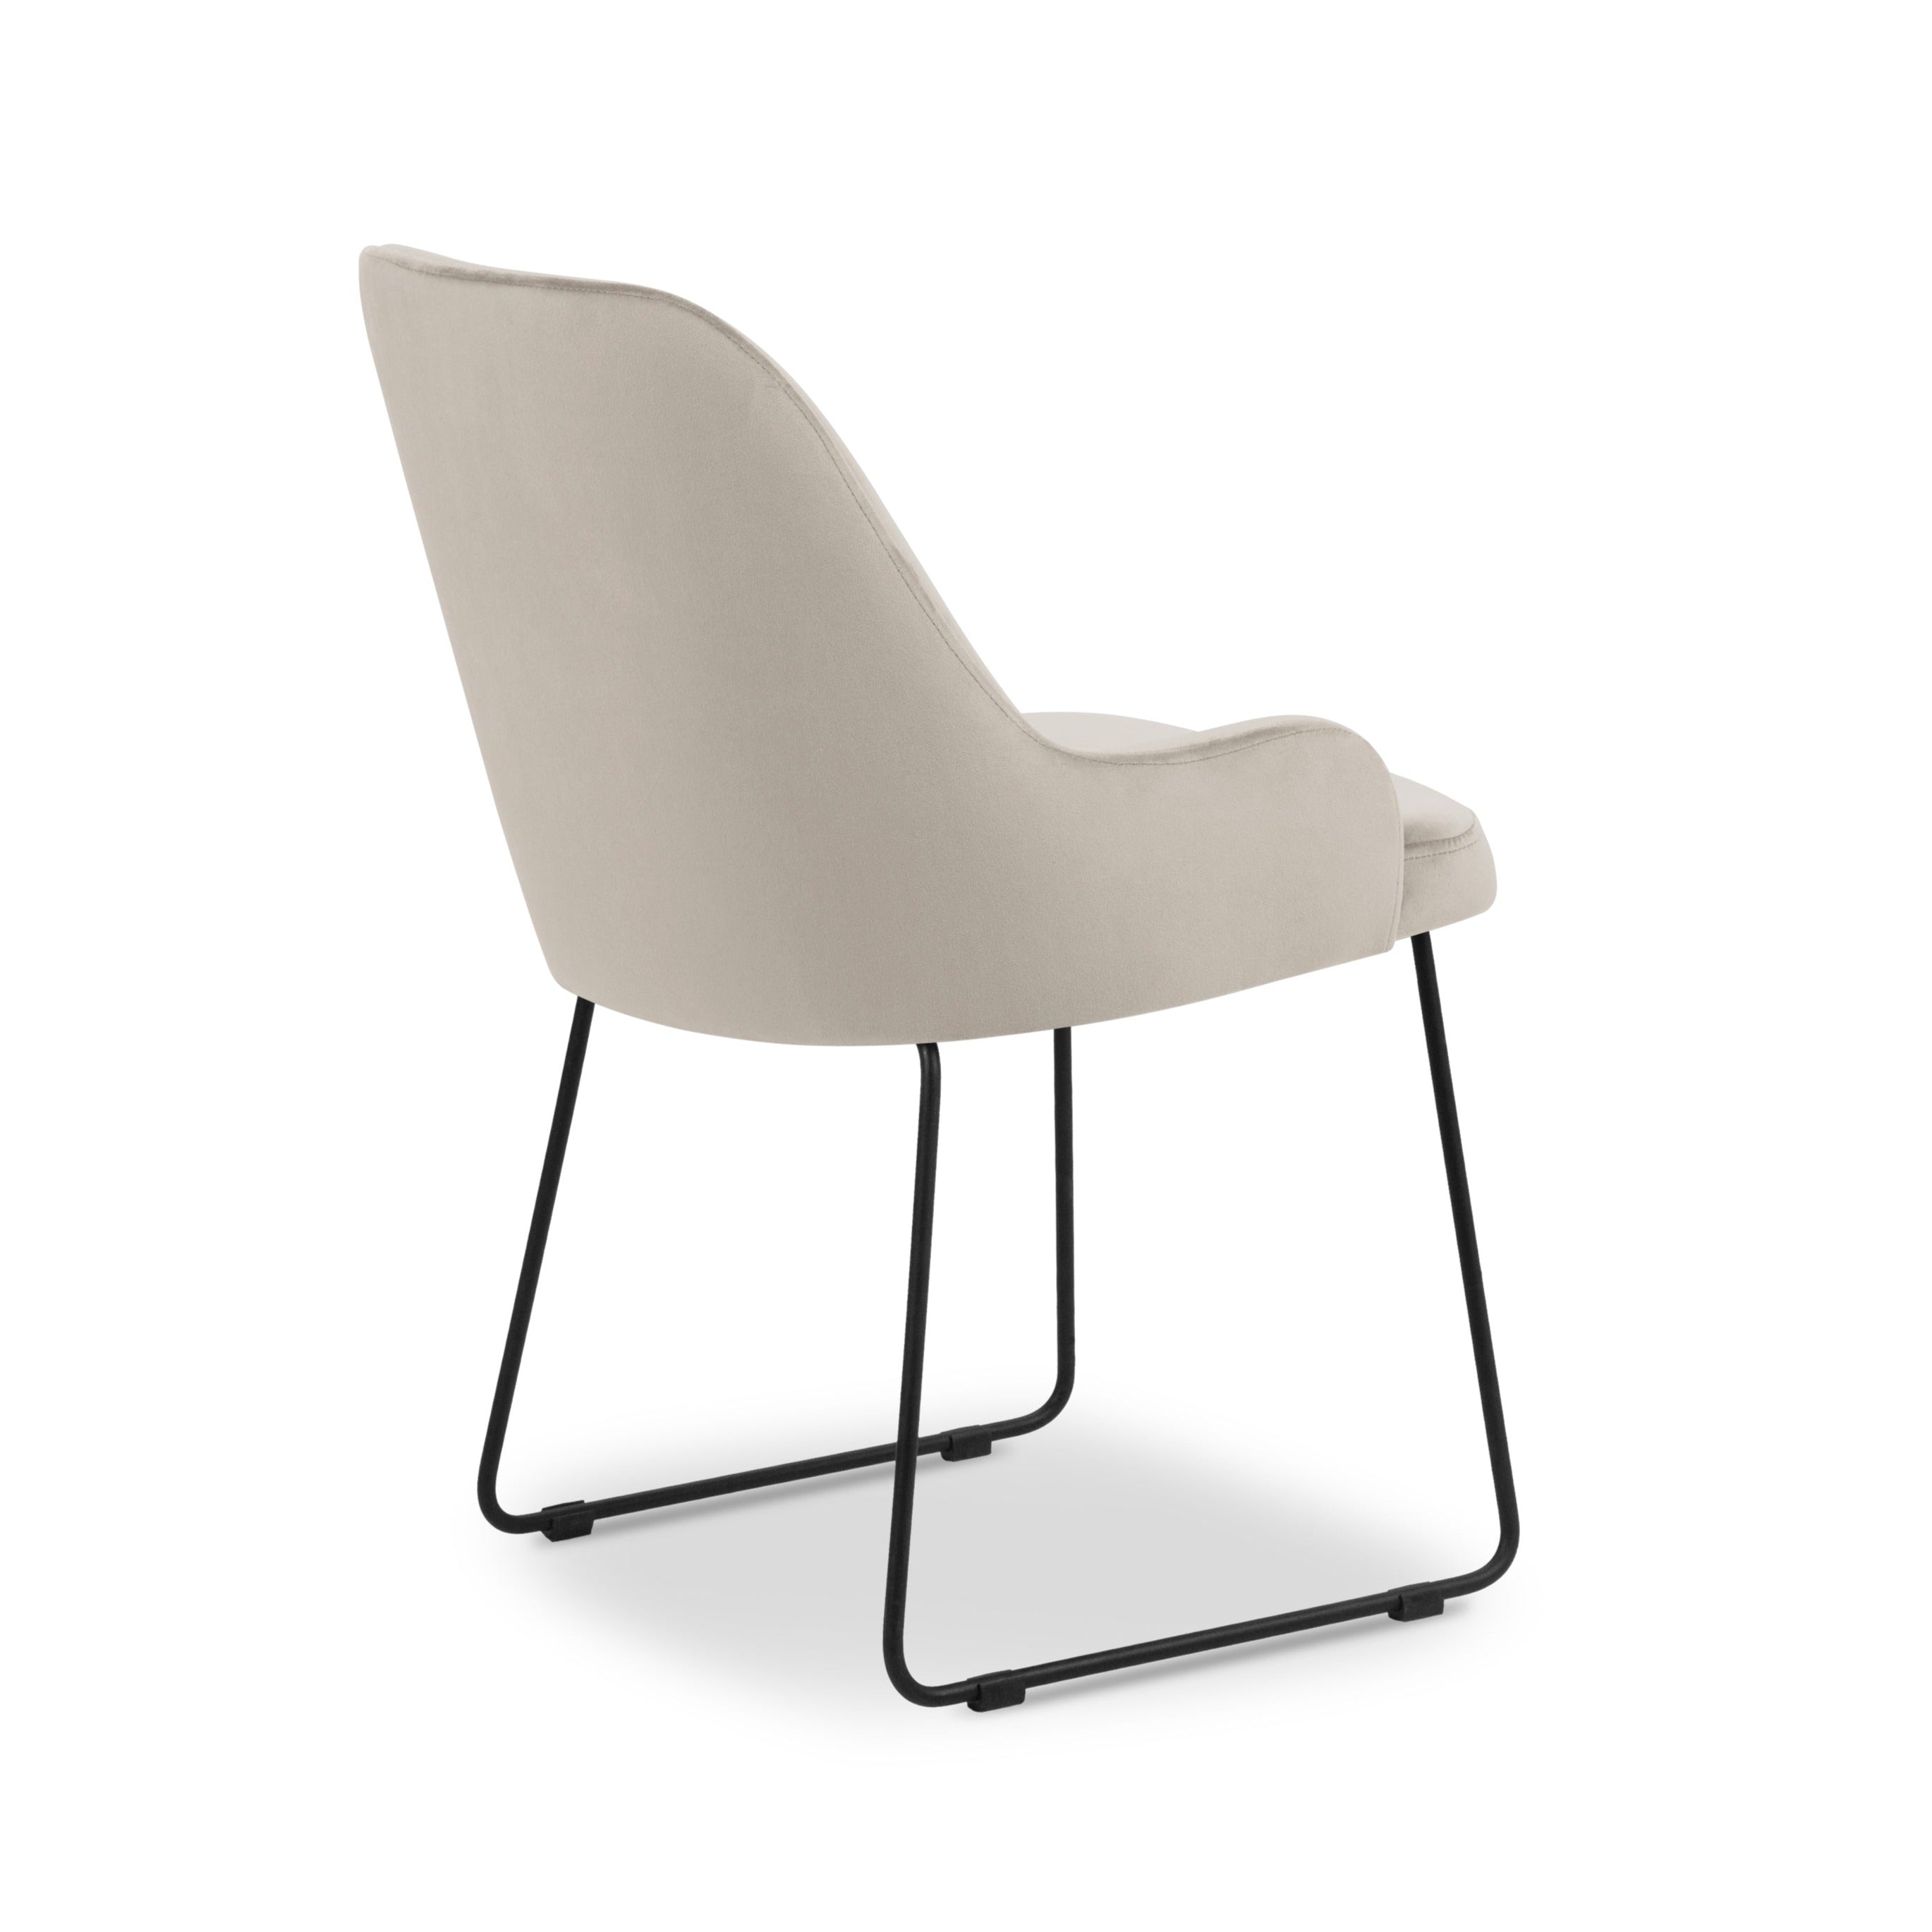 Beige chair with a black base